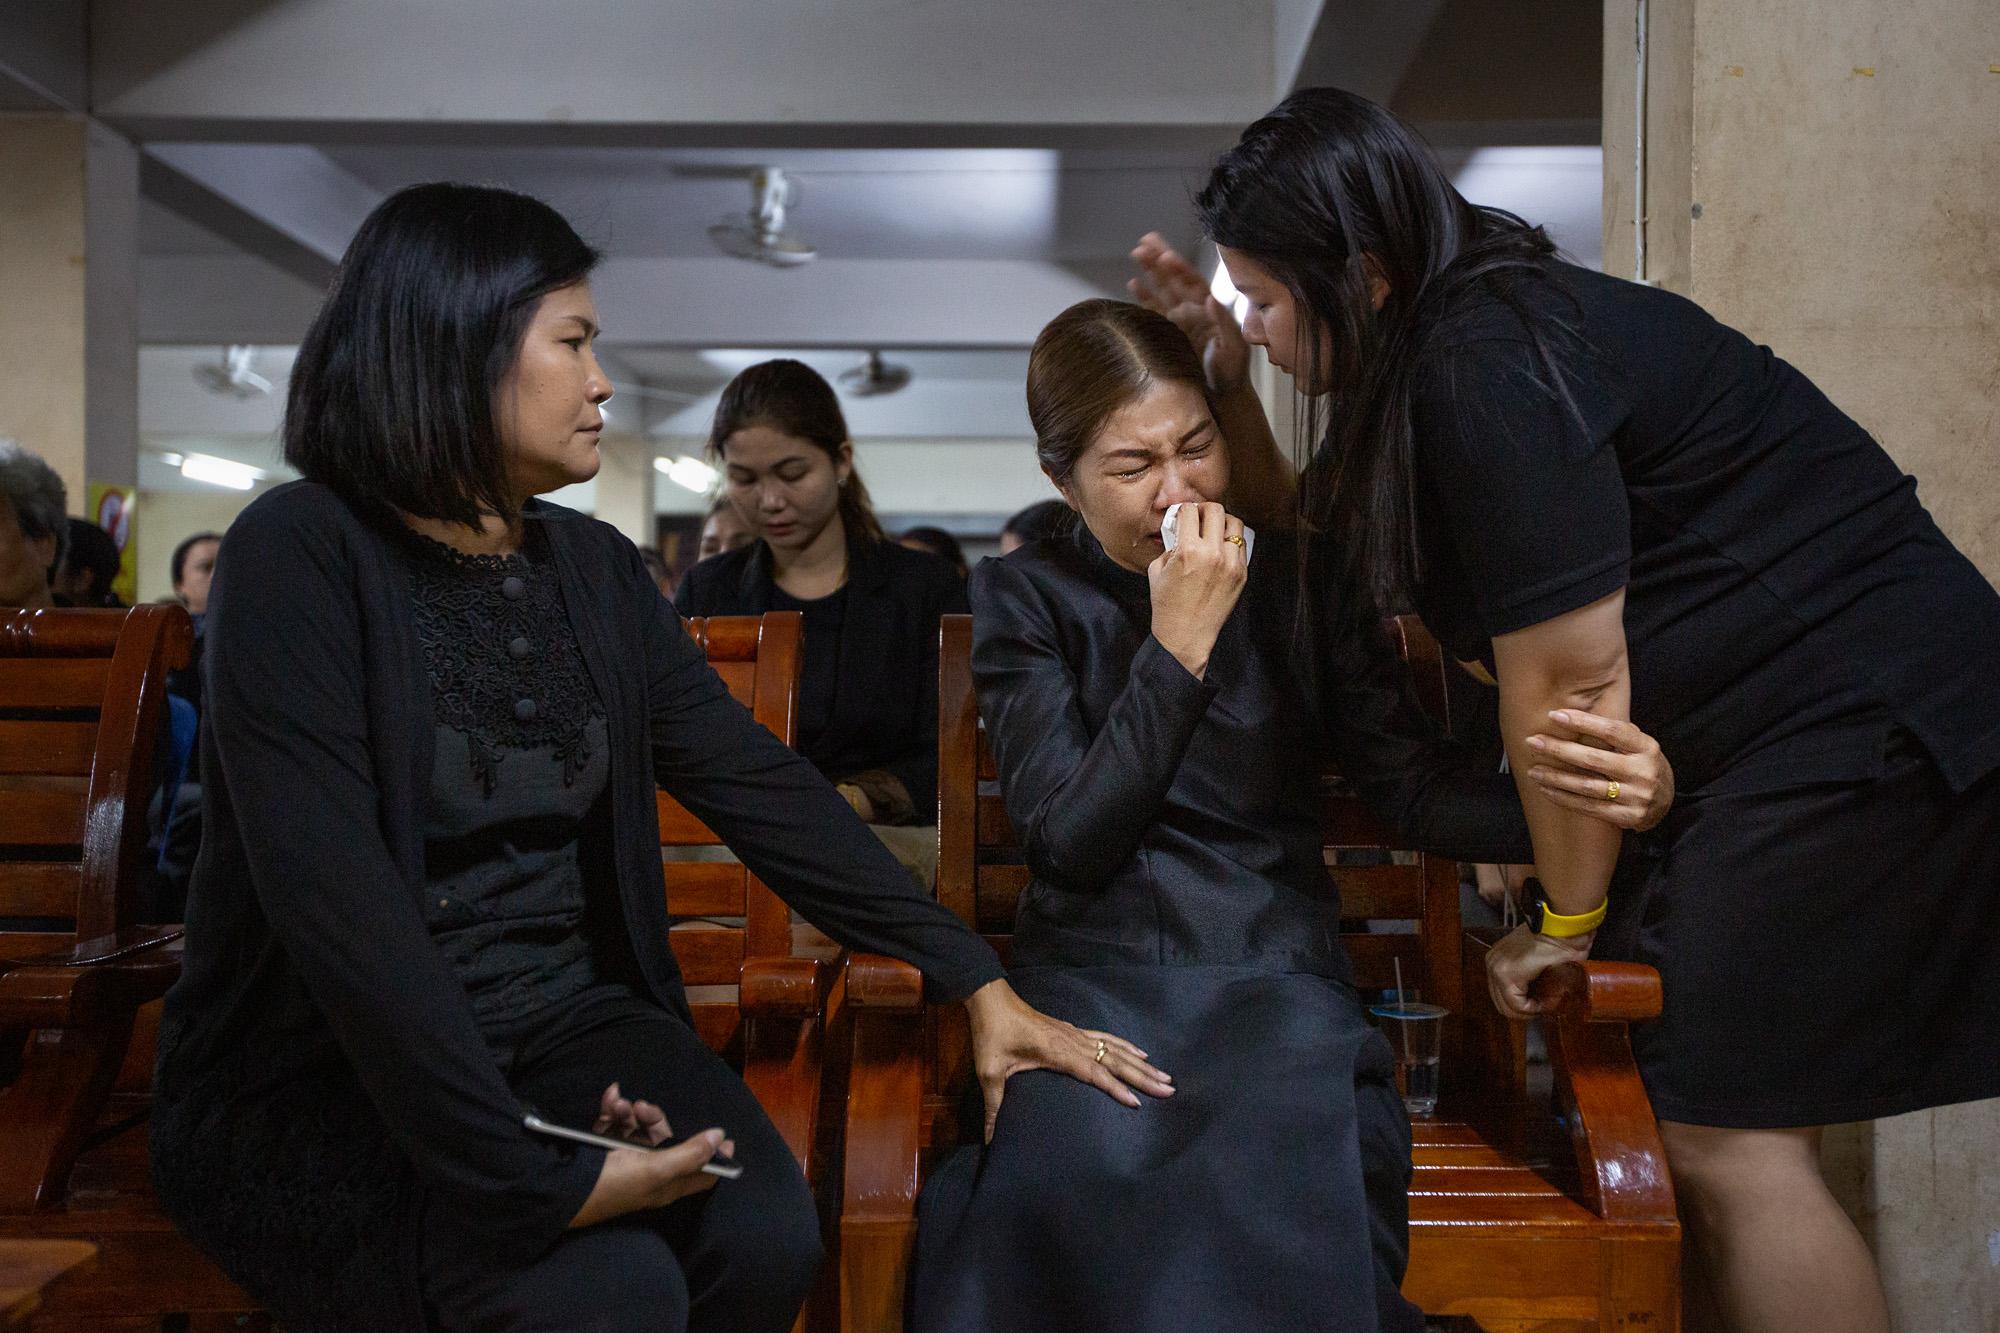 Shooting in Korat, Thailand: The New York Times - The mother of Ratchanon Karnchanamethee, 13, who was...